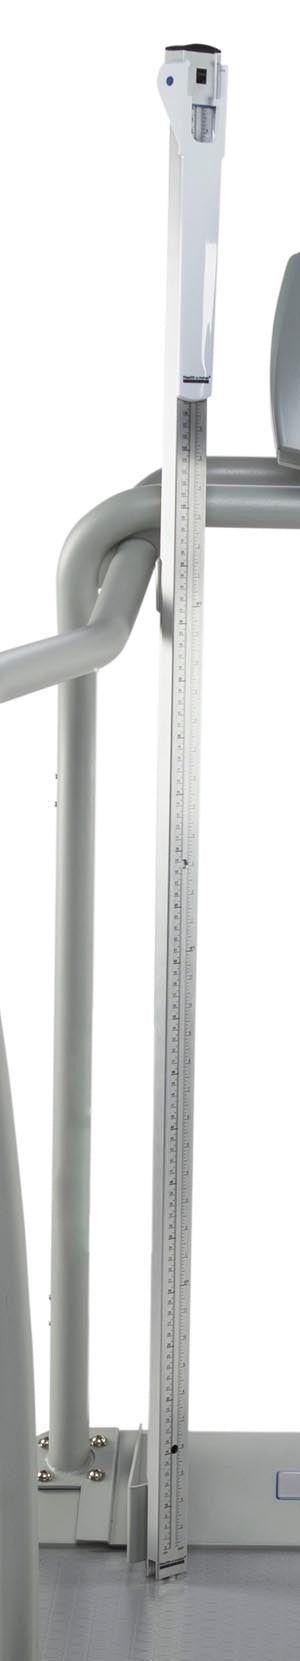 Pelstar/Health O Meter Professional Scale - Parts & Accessories. Height Rod For1100Kl/2101Kl/2500Kl (Drop), Each